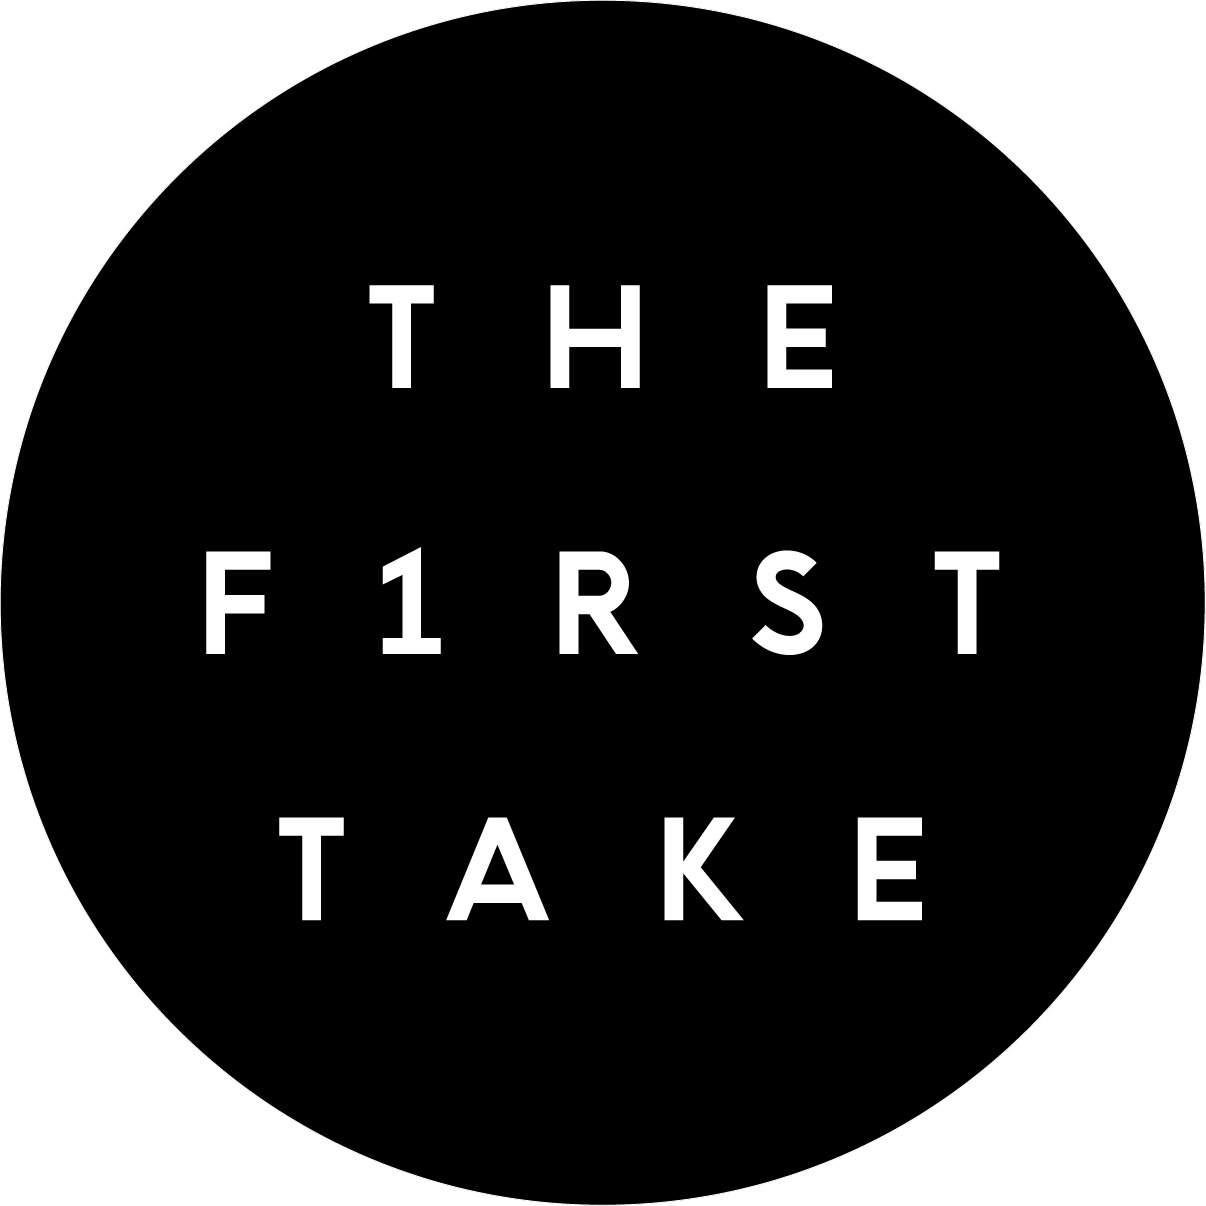 「THE FIRST TAKE」ロゴ